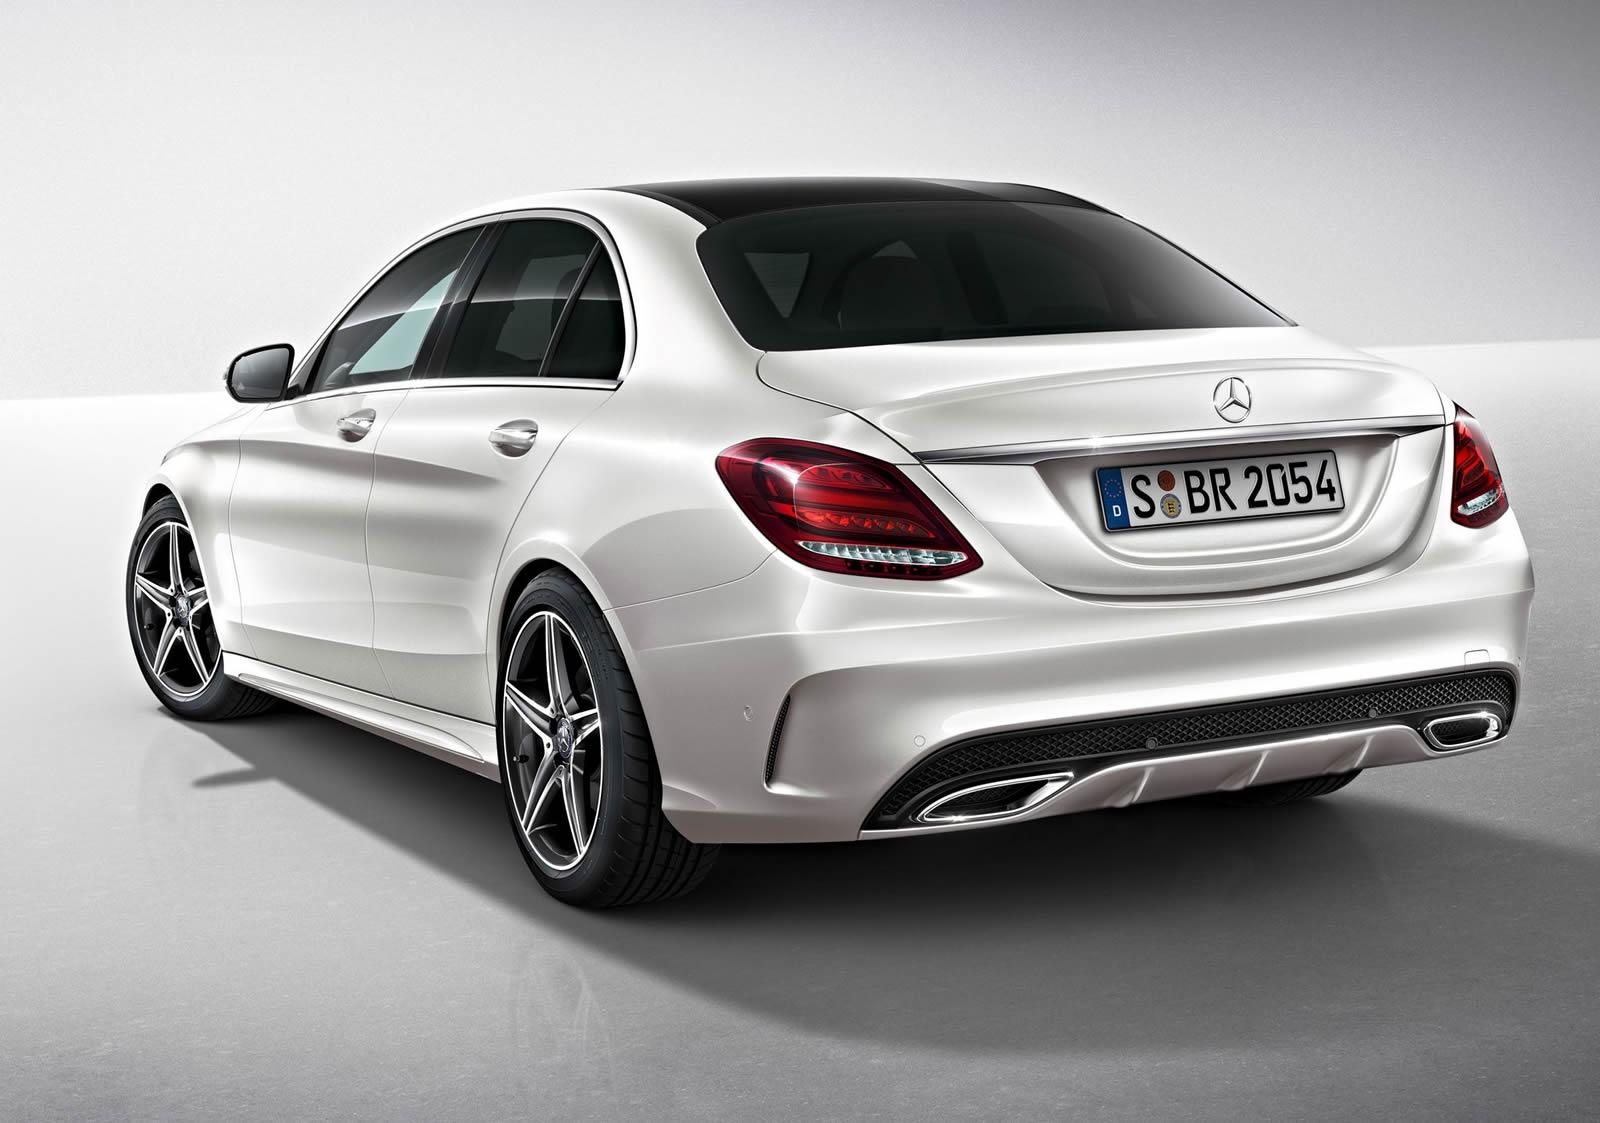 W205 Mercedes-Benz C-Class: more details on the AMG Line